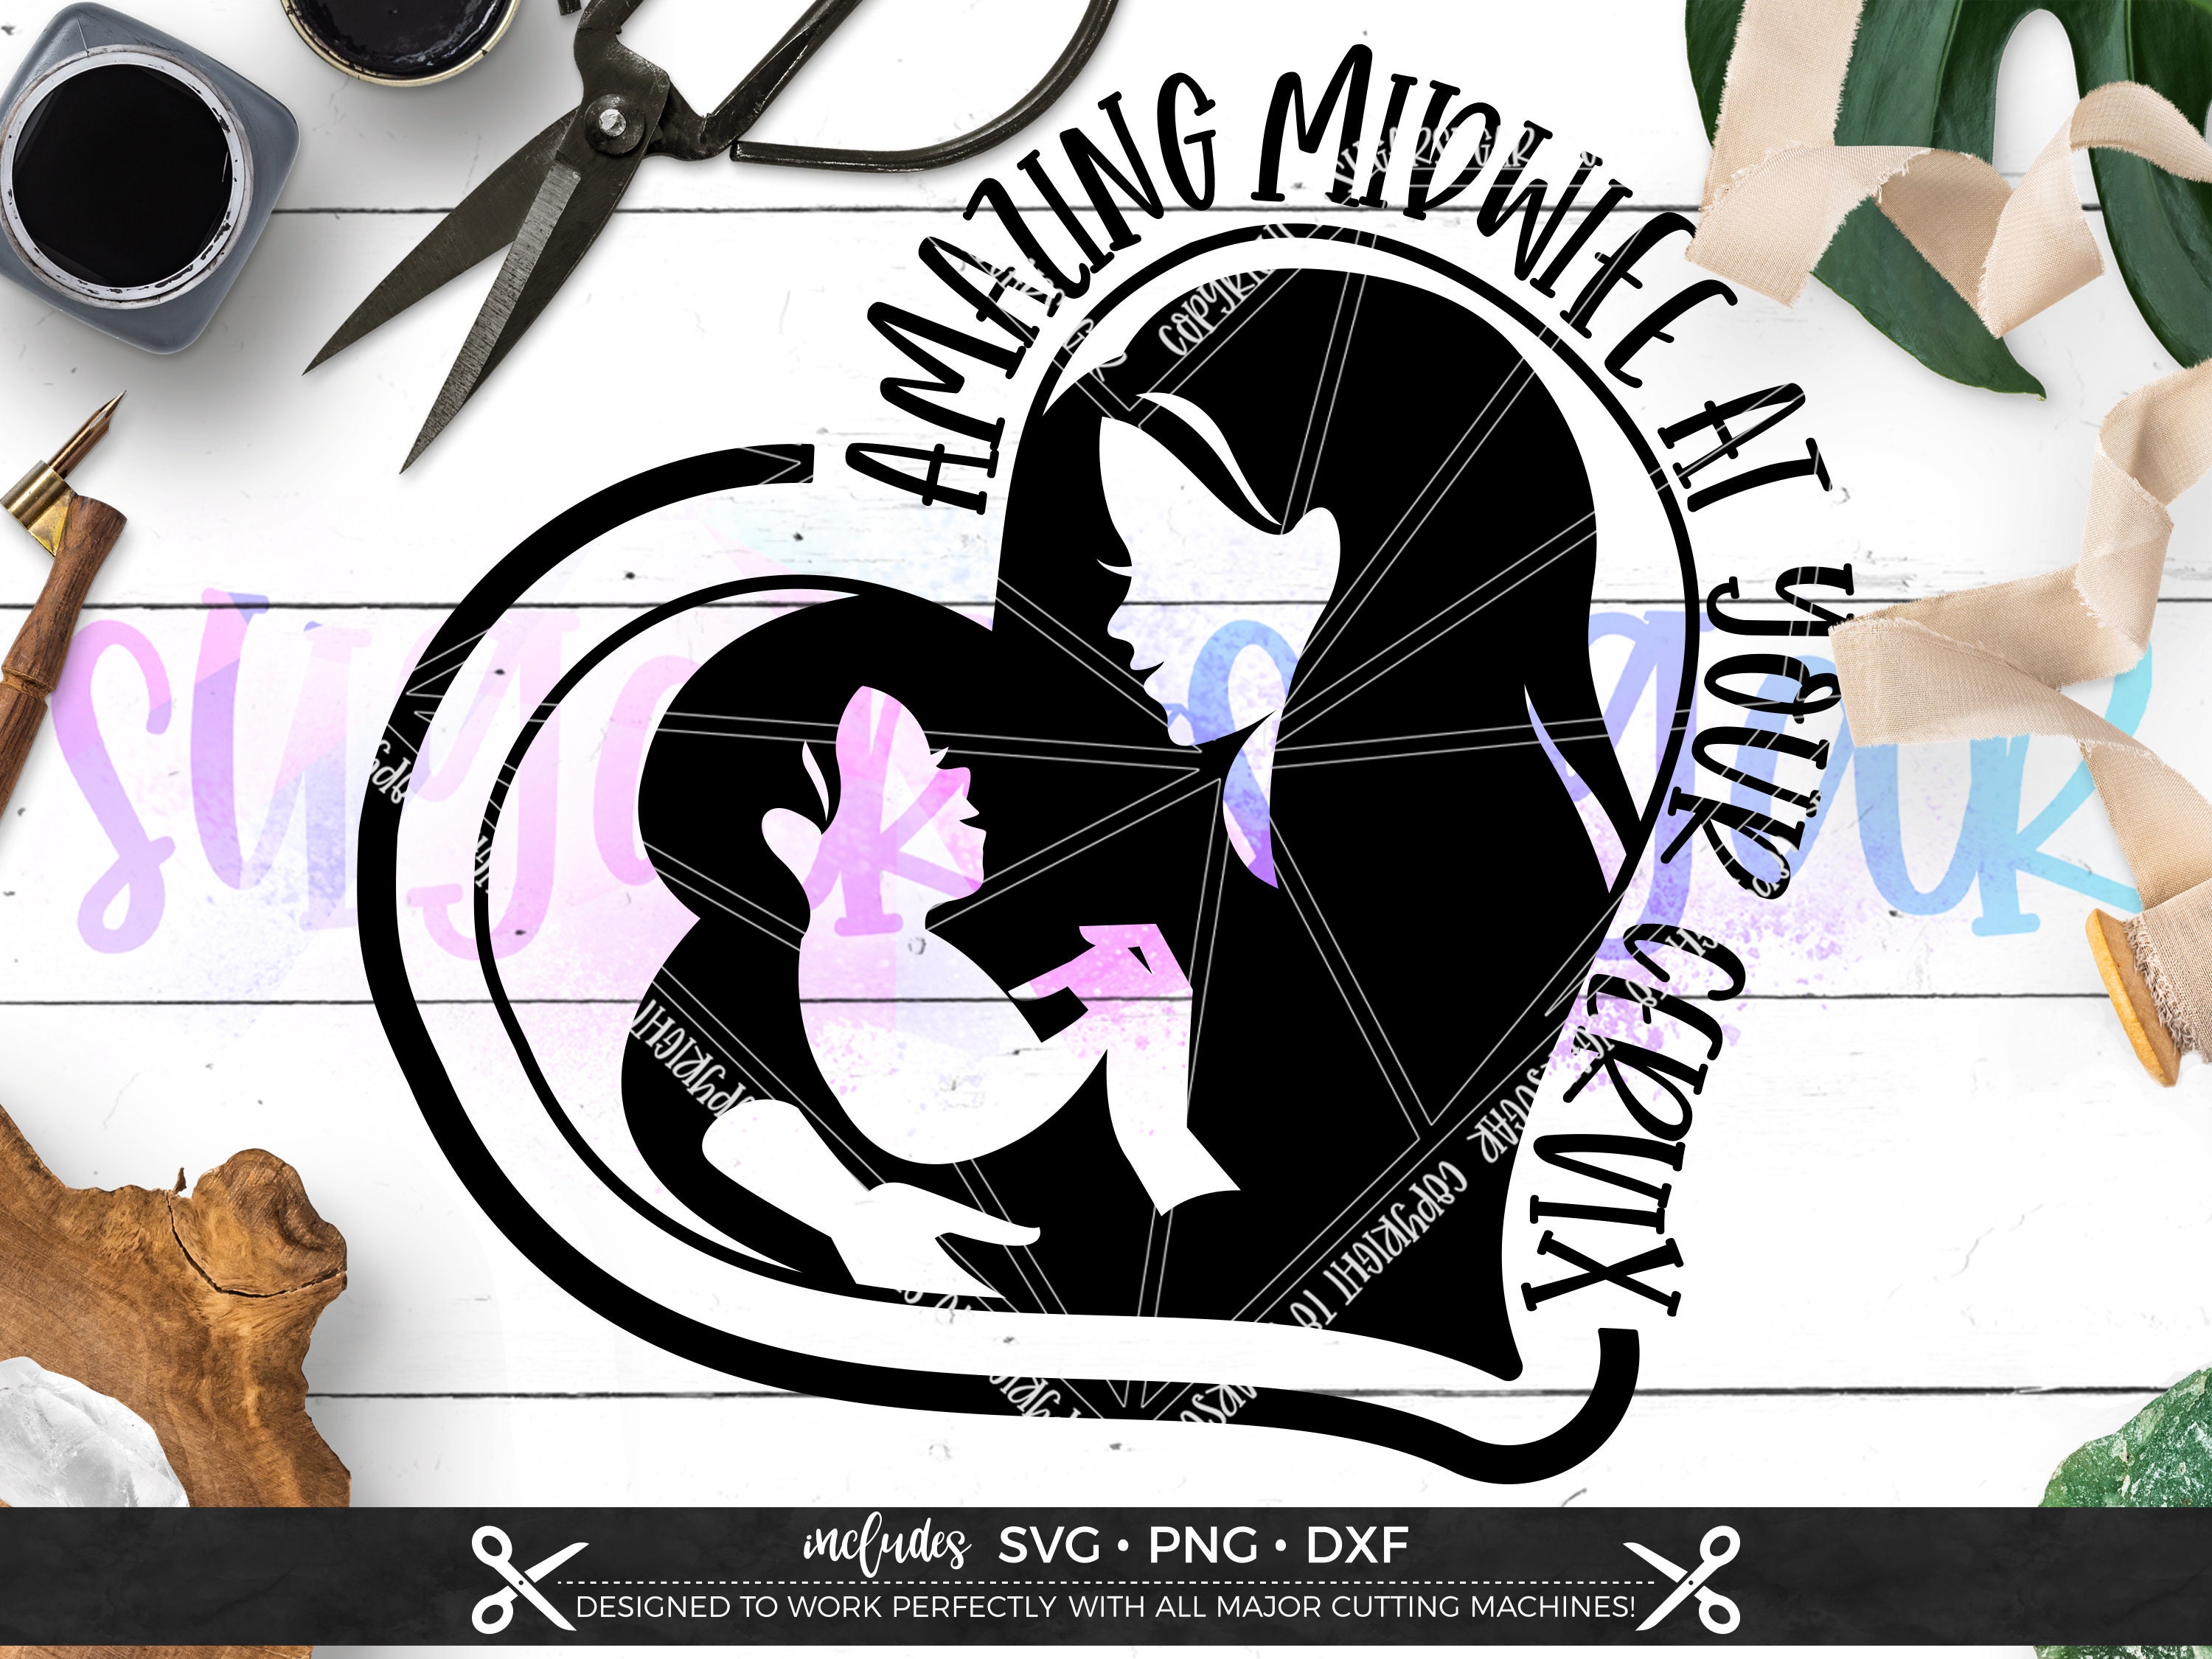 Amazing Midwife at Your Cervix Midwife Svg Files for Cricut pic